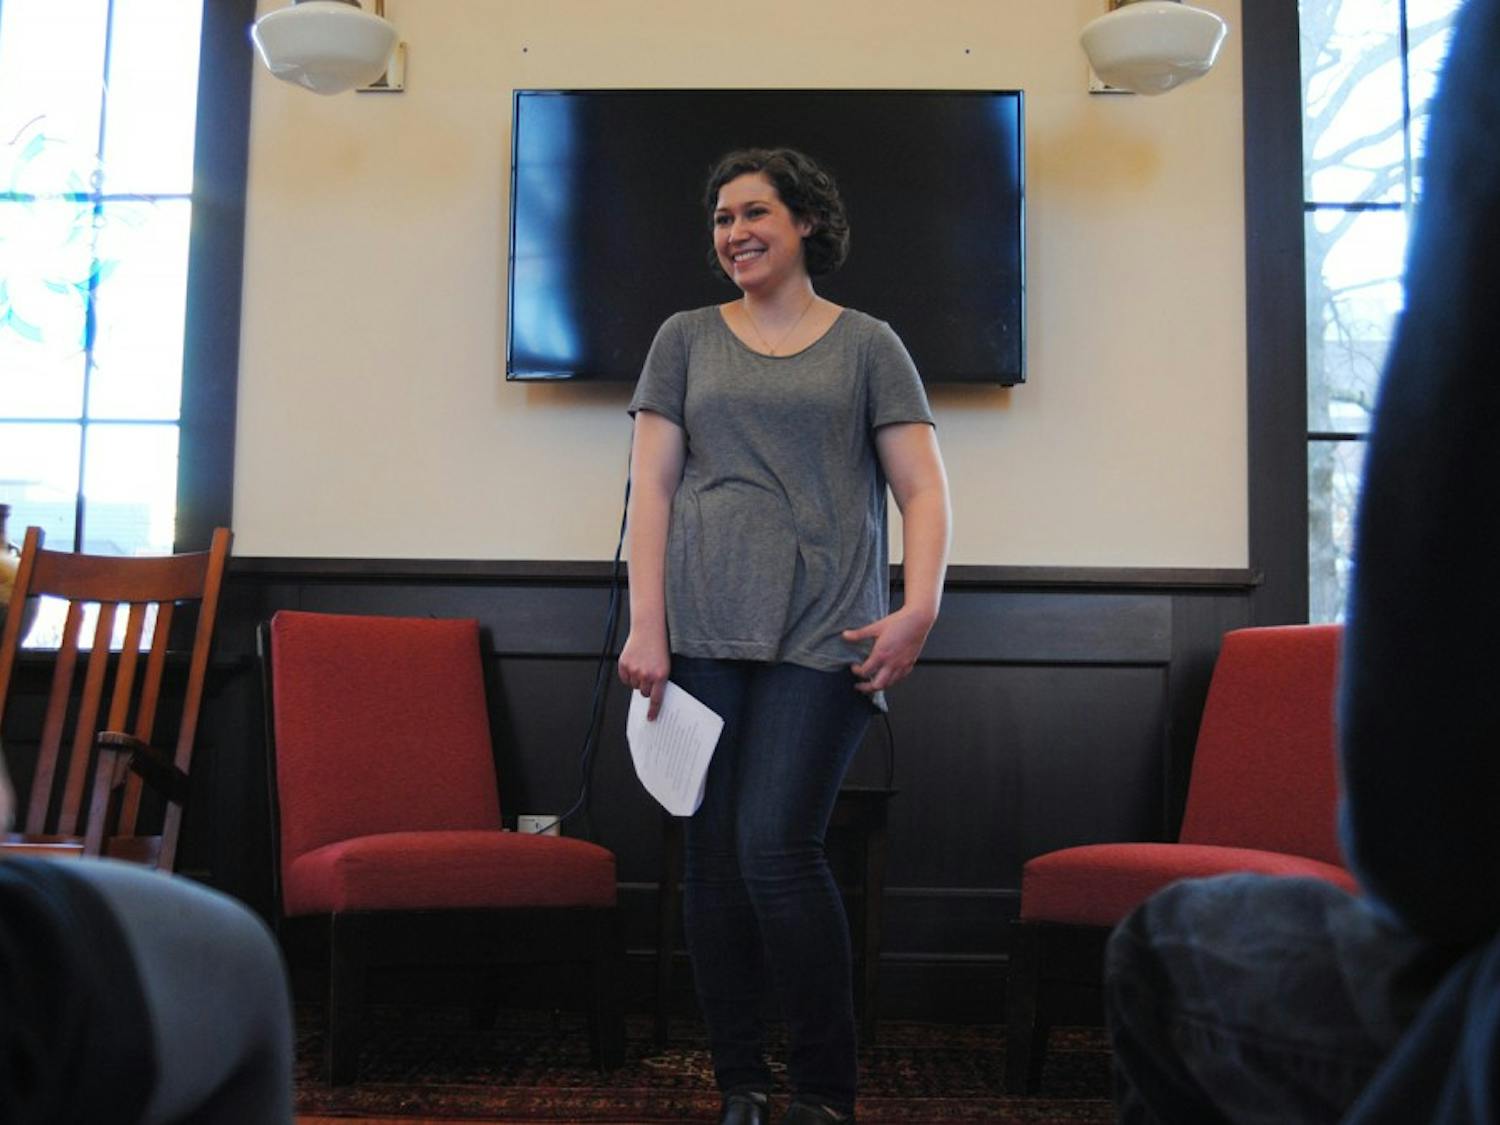 Rachel Guerra of the UNC Center of Excellence for Eating Disorders spoke about body image at the Campus Y Friday afternoon as a part of the Feminist Friday series.